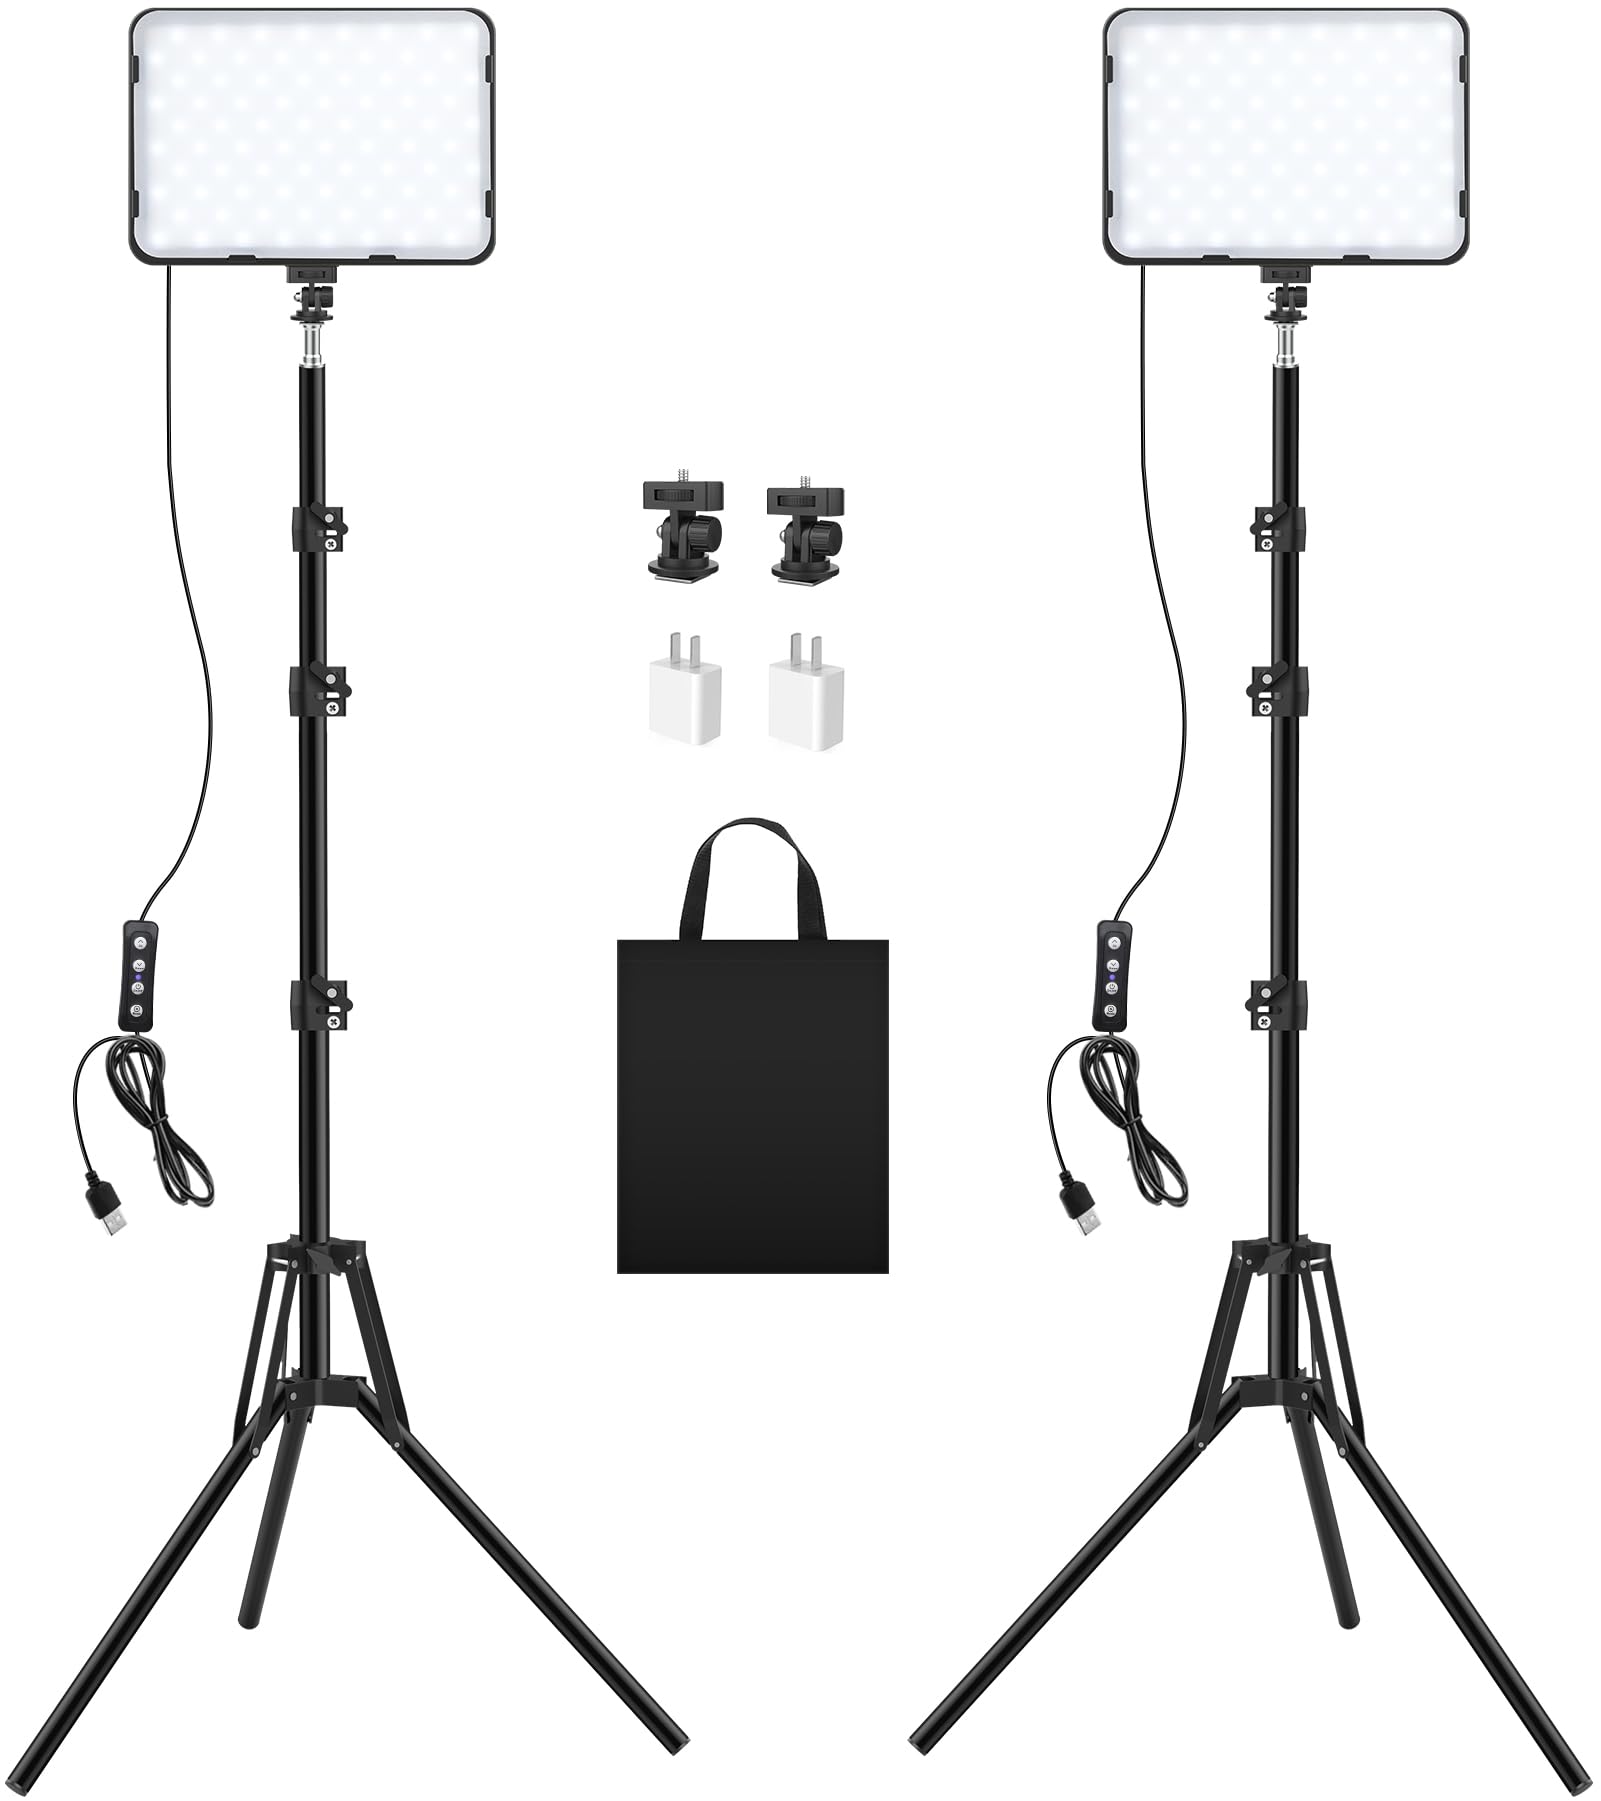 2 Pack Photography Video Lighting Kit, LED Video Light with 62'' Tripod Stand, Tinpops 2500-8500K Studio Streaming Lighting for Video Recording Live Game Podcast YouTube Portrait Photo Shooting-OXIMETERBUY